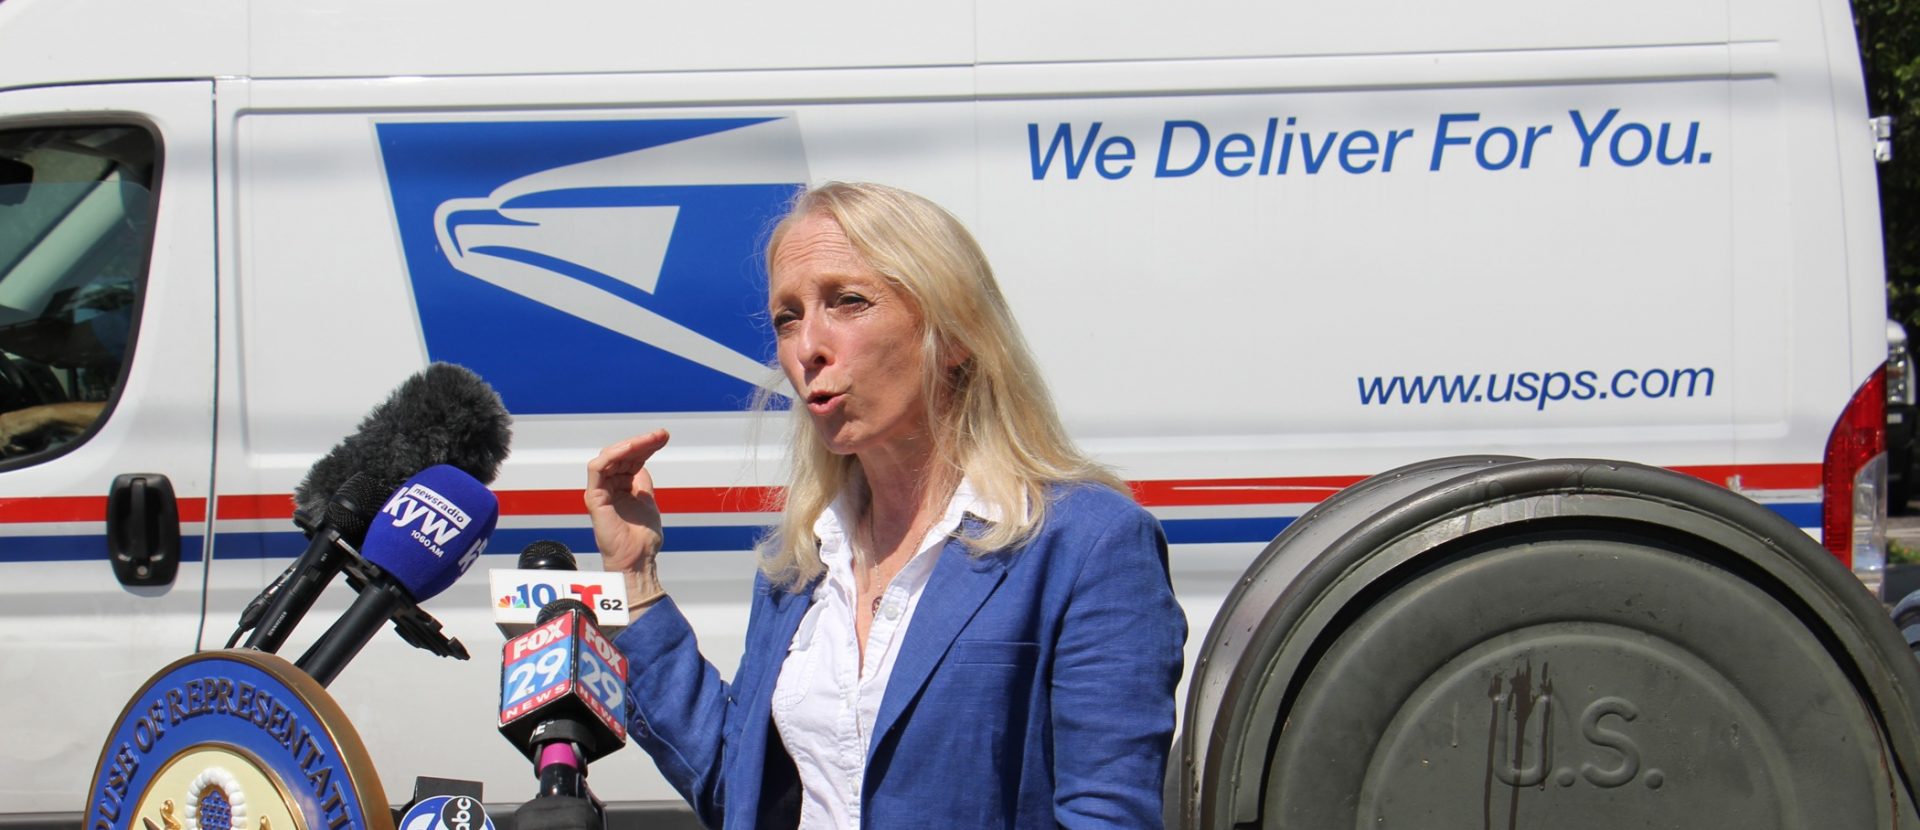 U.S. Rep. Mary Gay Scanlon joins federal, state and local officials at Second and Spring Garden streets to call for emergency funding for the struggling U.S. Postal Service.